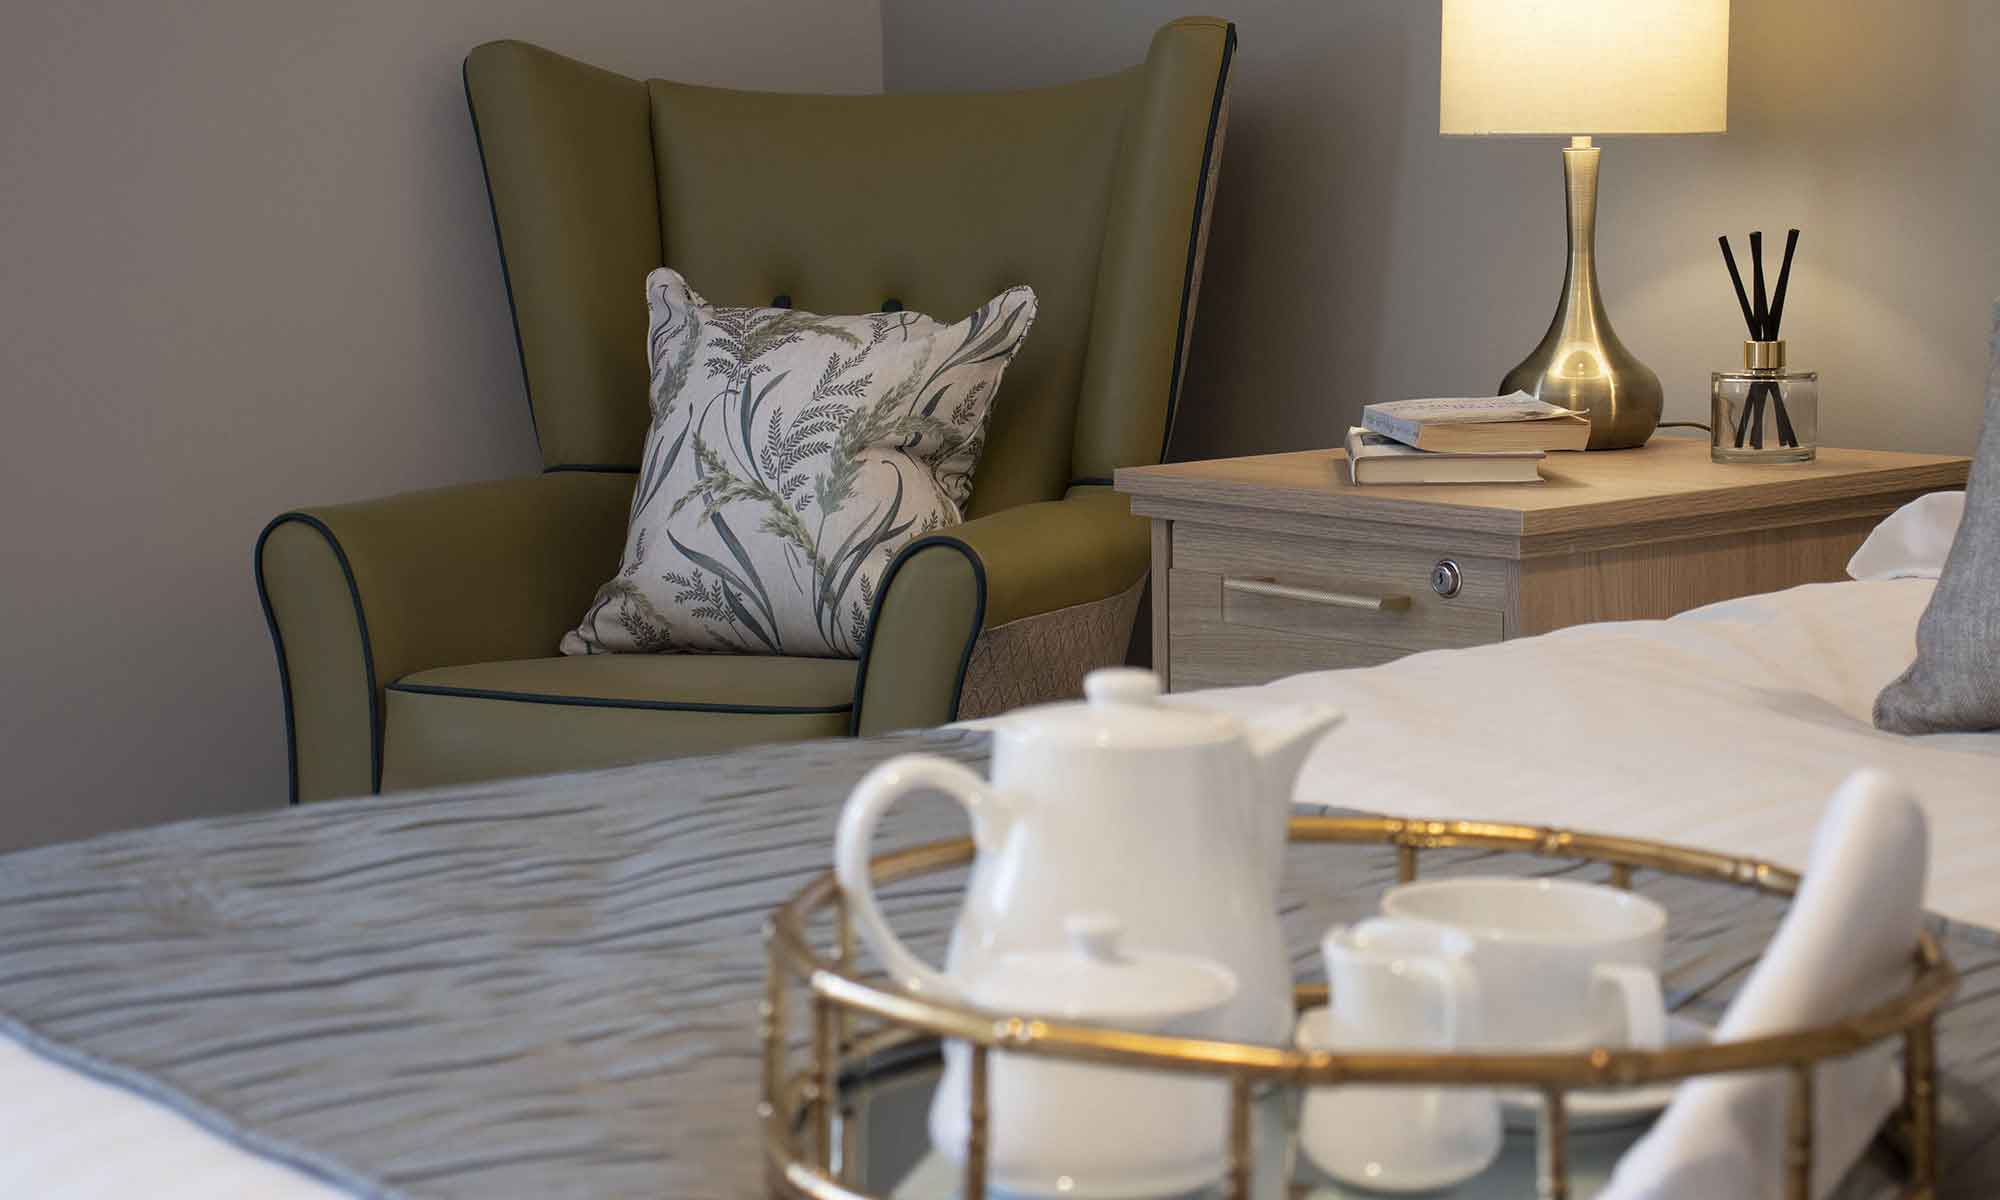 An image of a bedroom interior at St Mary's Care Home in Anlaby. A Valencia wingback chair in the corner in a olive green fabric with contrast piping and scatter cushion, the Windsor bedside cabinet with a gold lamp, book and reed diffuser on top with a close up of the bed with a tray with a white tea set on top.